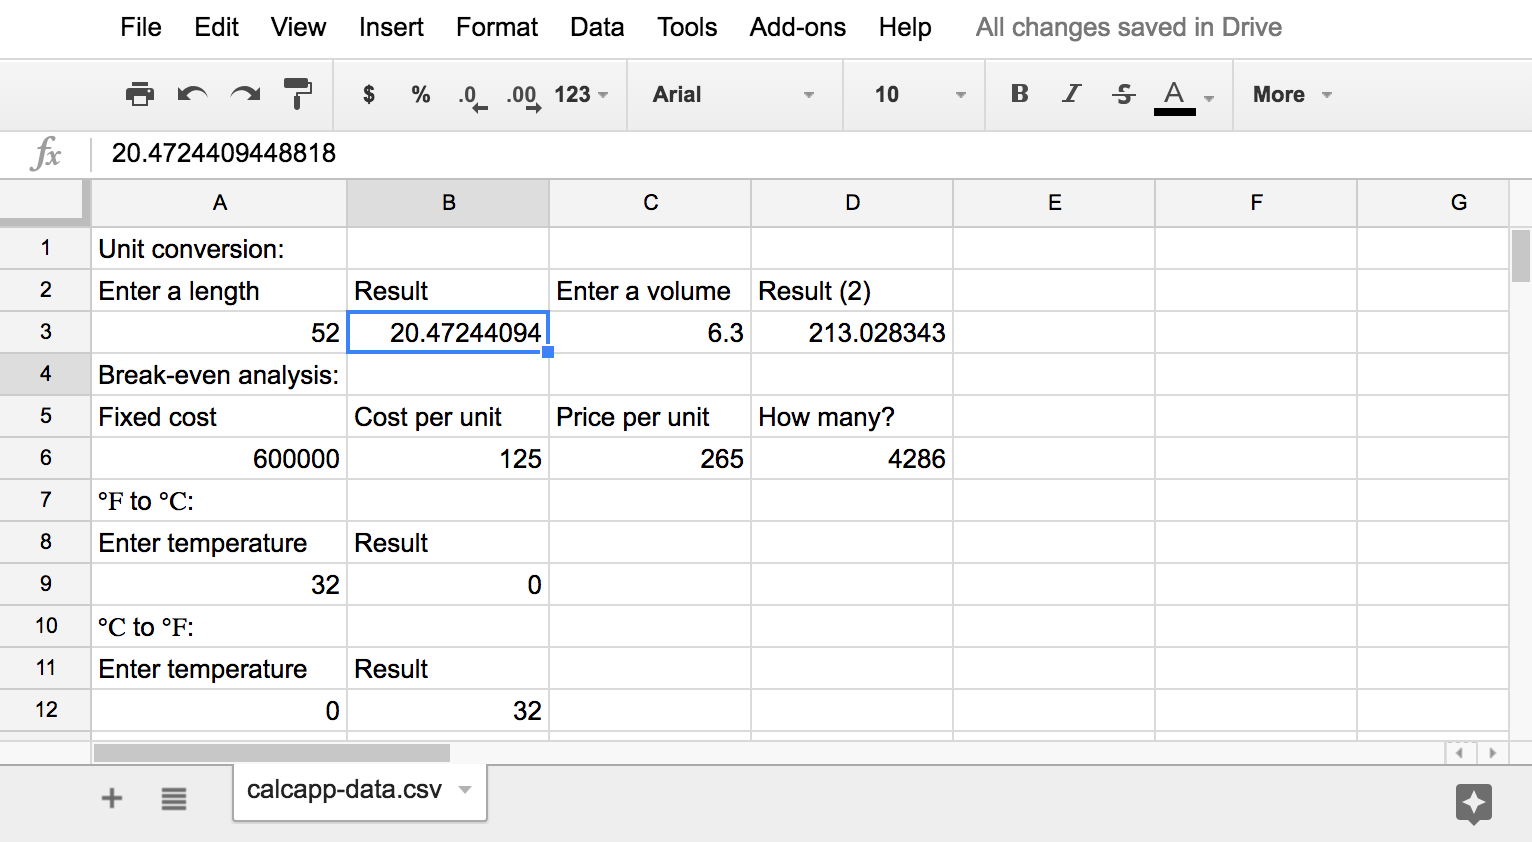 Calcapp data imported into Google Sheets